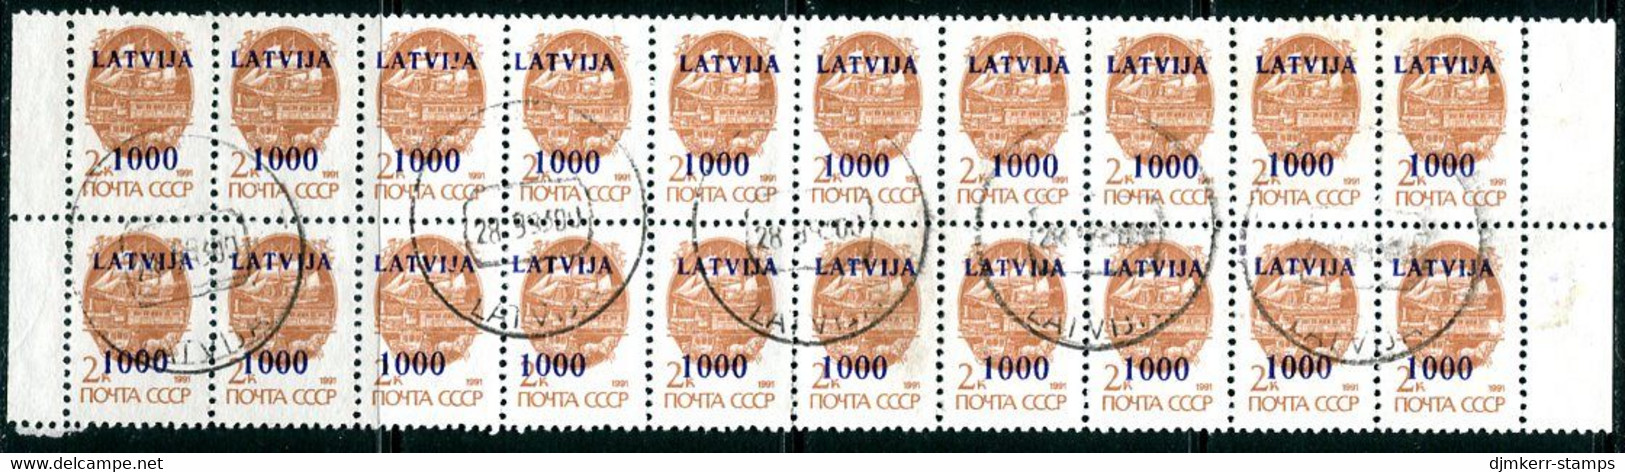 LATVIA 1991 Provisional Surcharges I 1000 K. Block Of 20 Used.  Michel 316 - Lettland